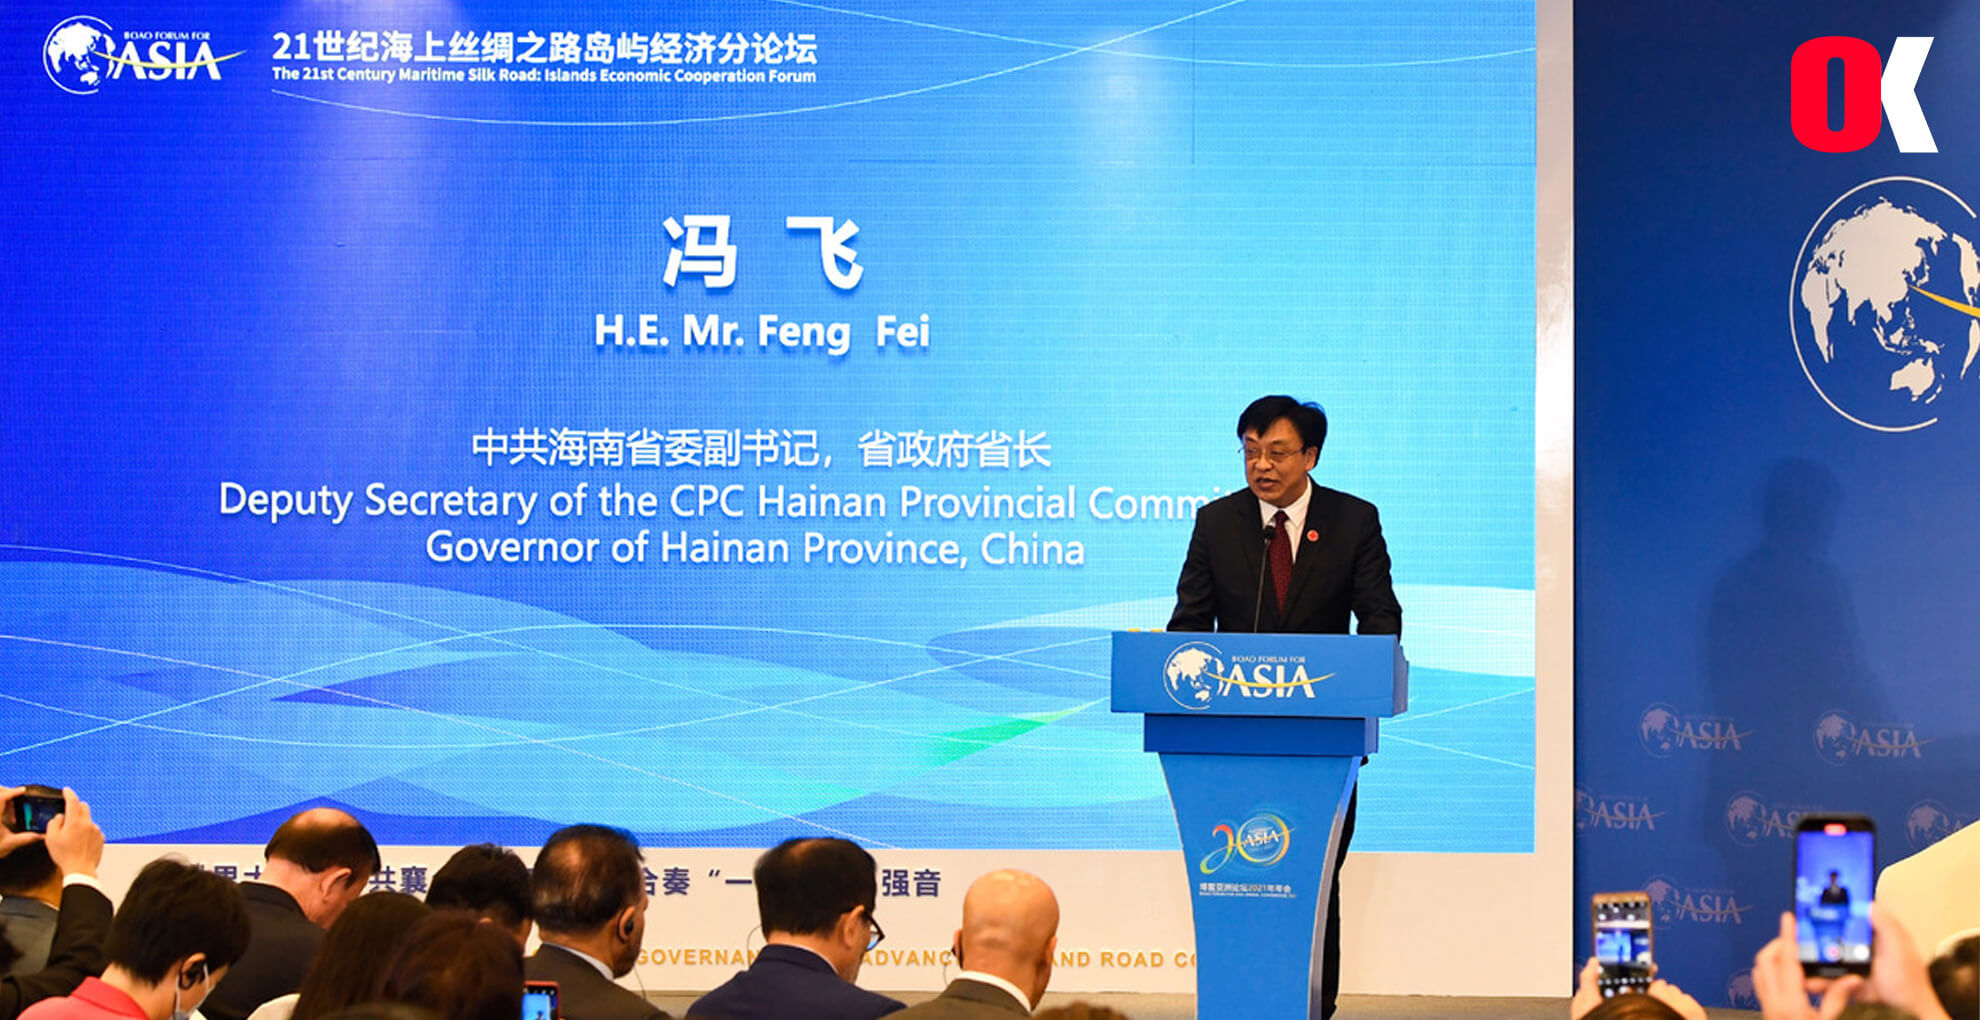 Free trade port relations between Hainan and ASEAN